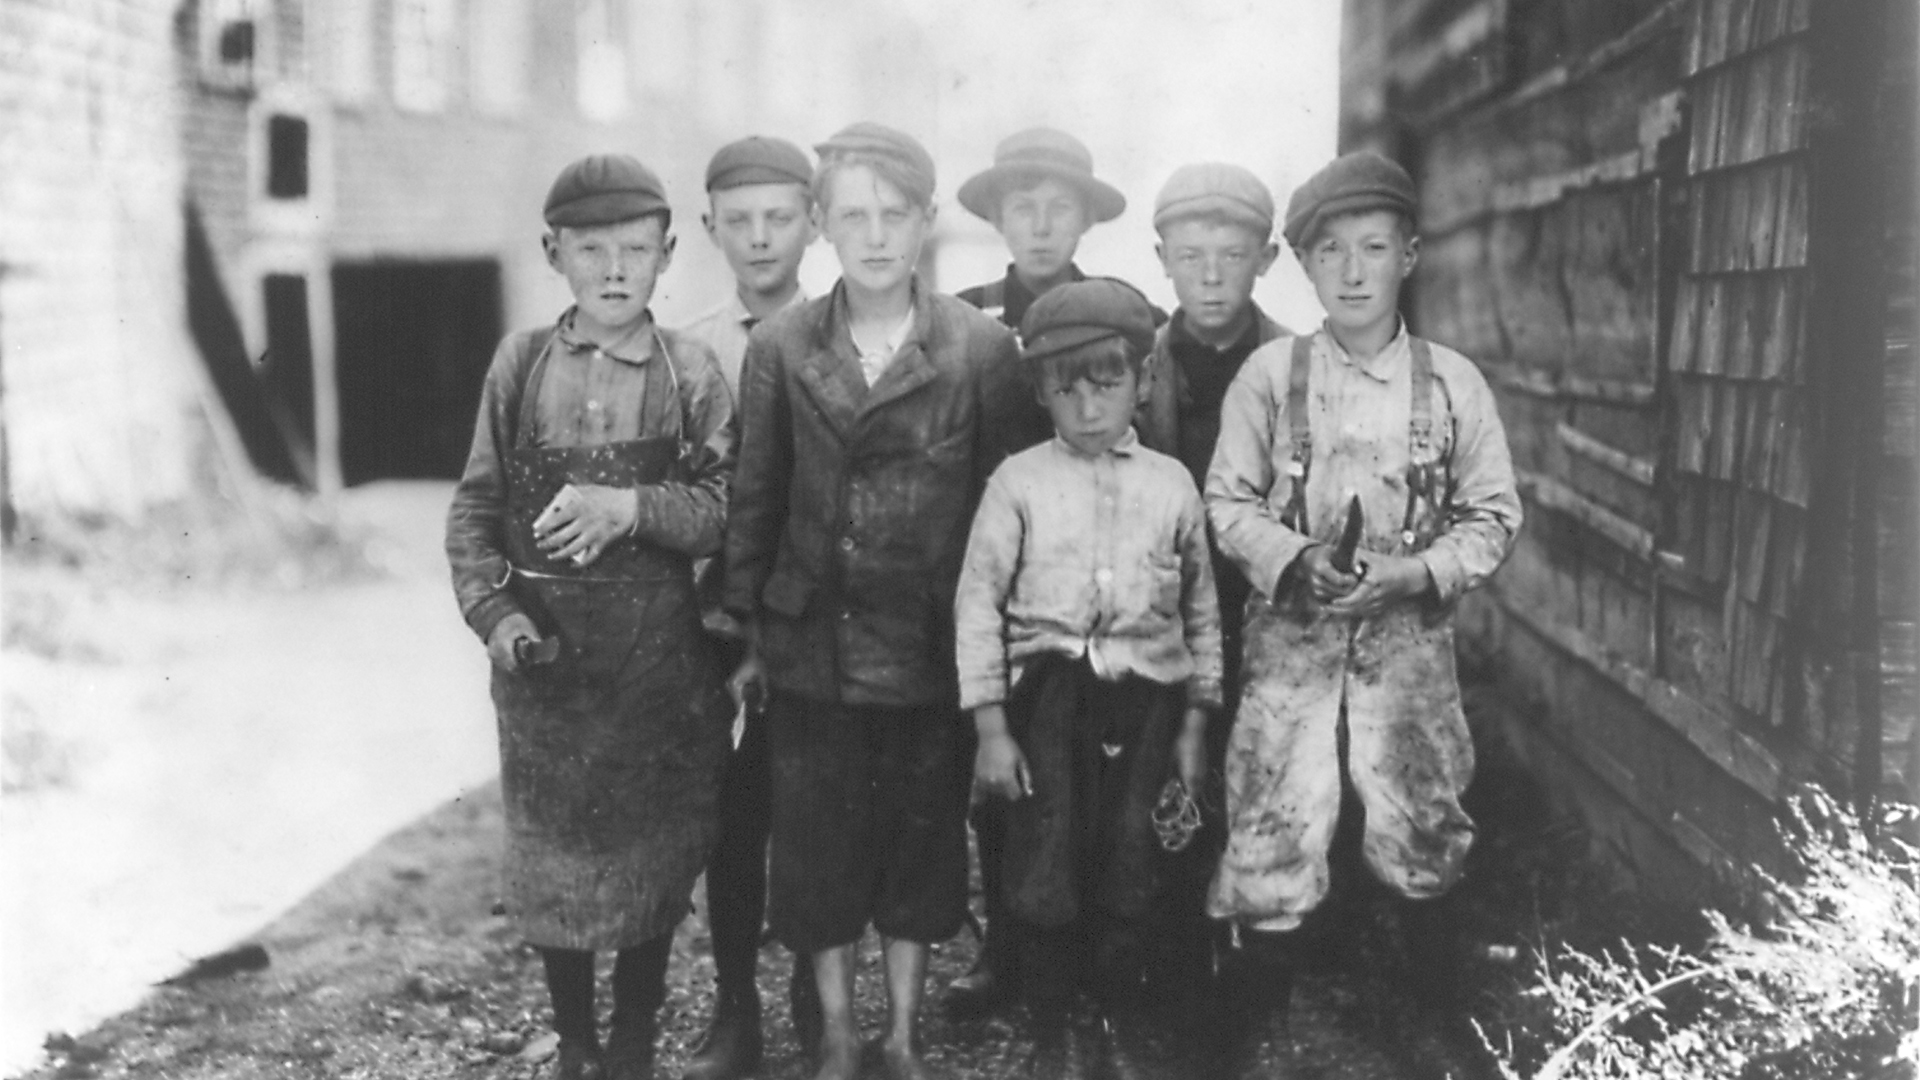 Working People: A History of Labour in British Columbia - E7 - Children at Work